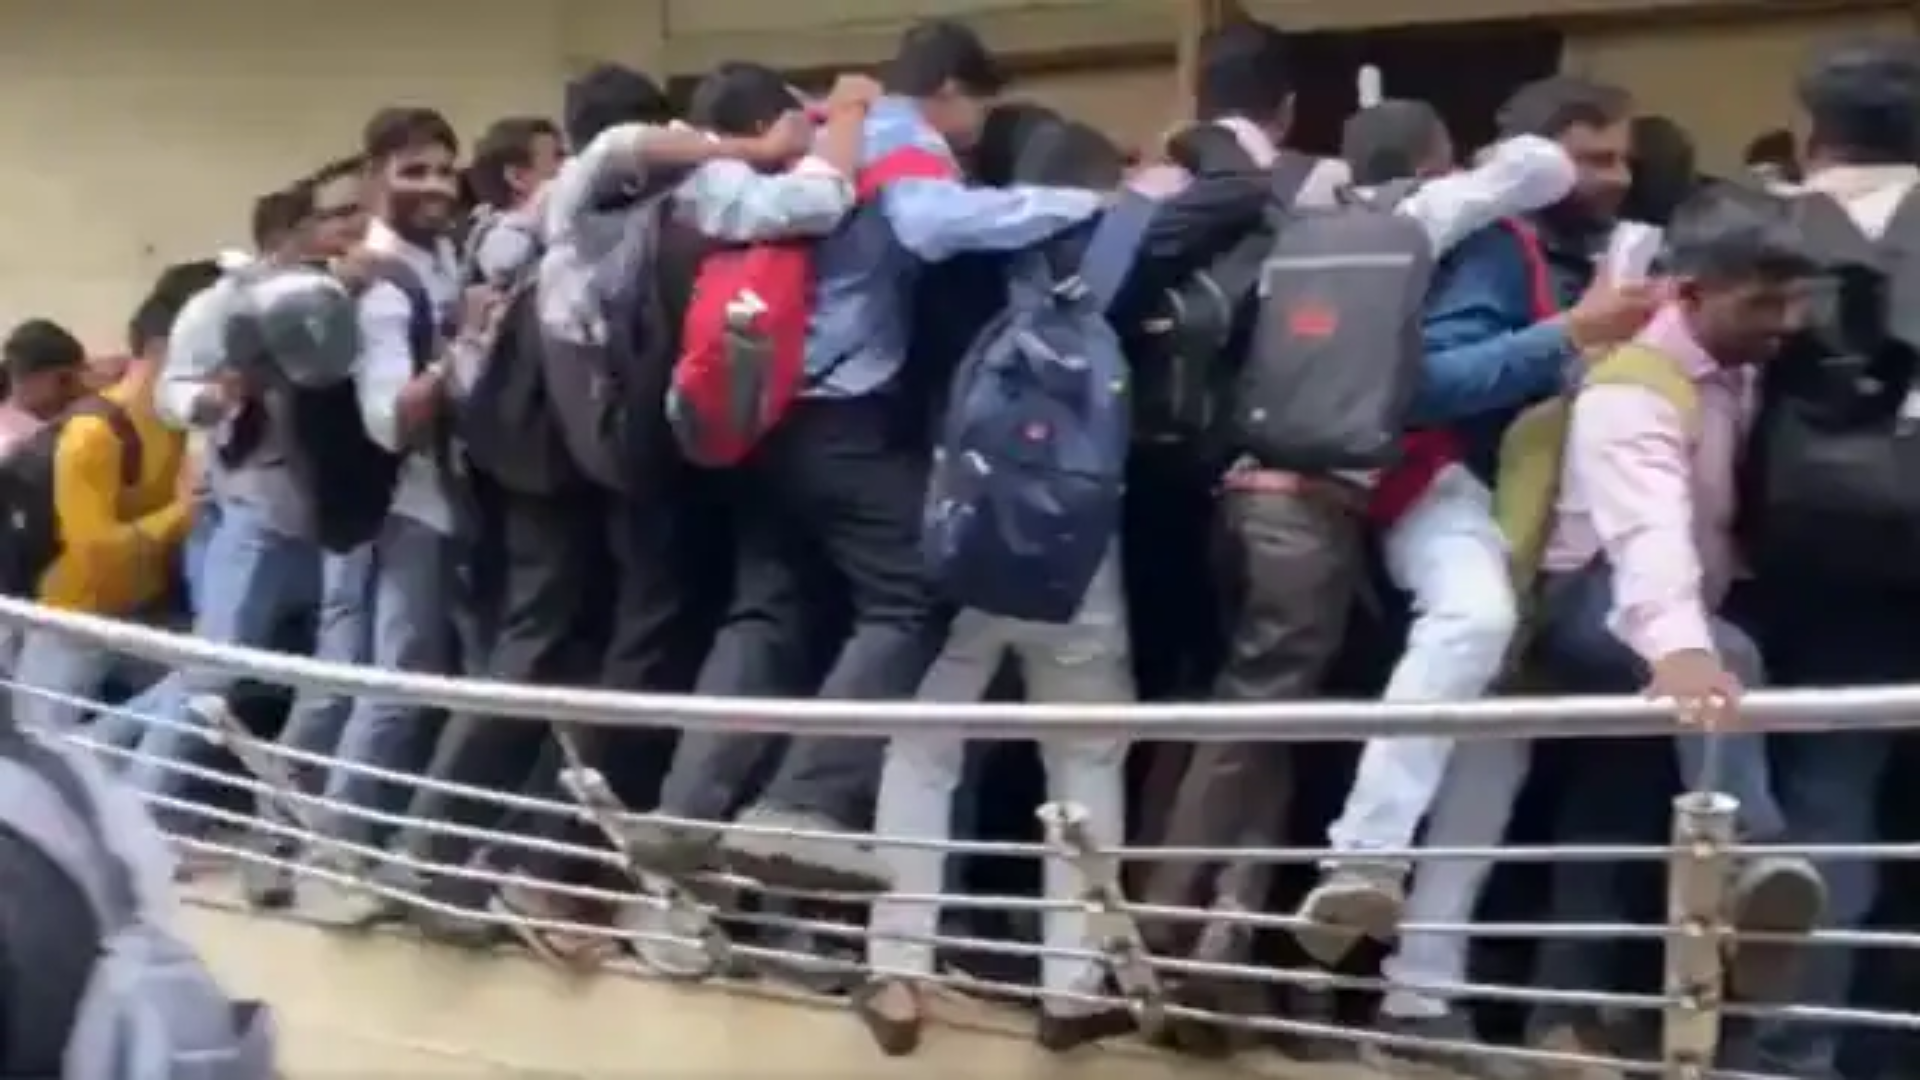 Stampede-Like Situation In Bharuch, 1,000+ Aspirants Attend Walk-In Interview For 40 Vacancies